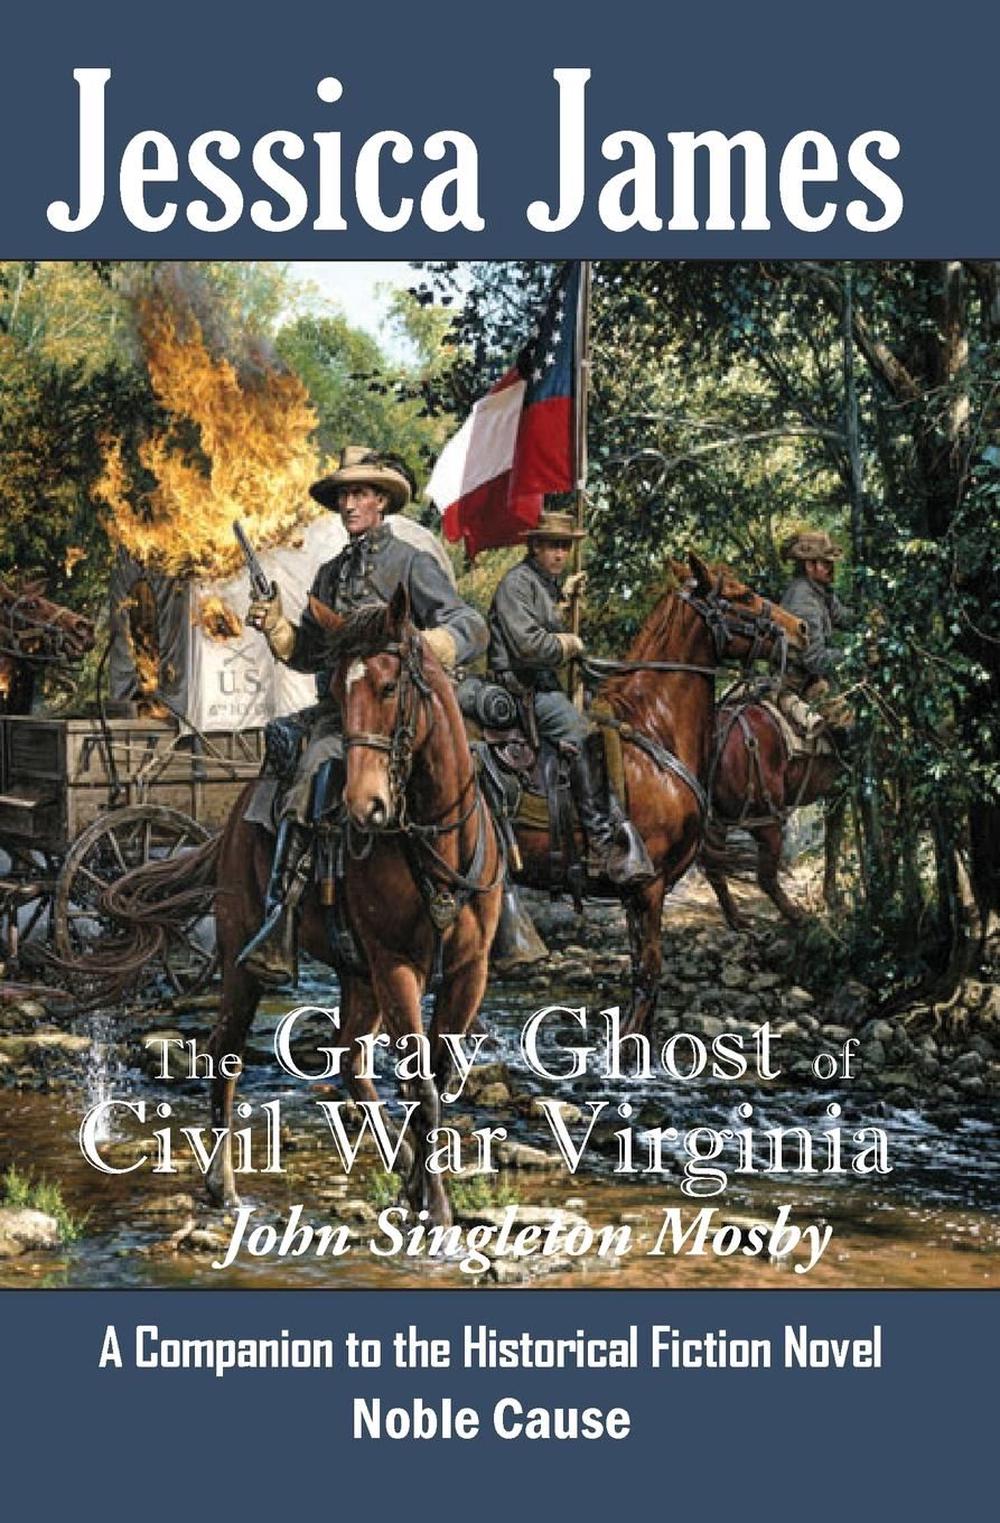 Gray Ghosts of the Confederacy by Richard S. Brownlee